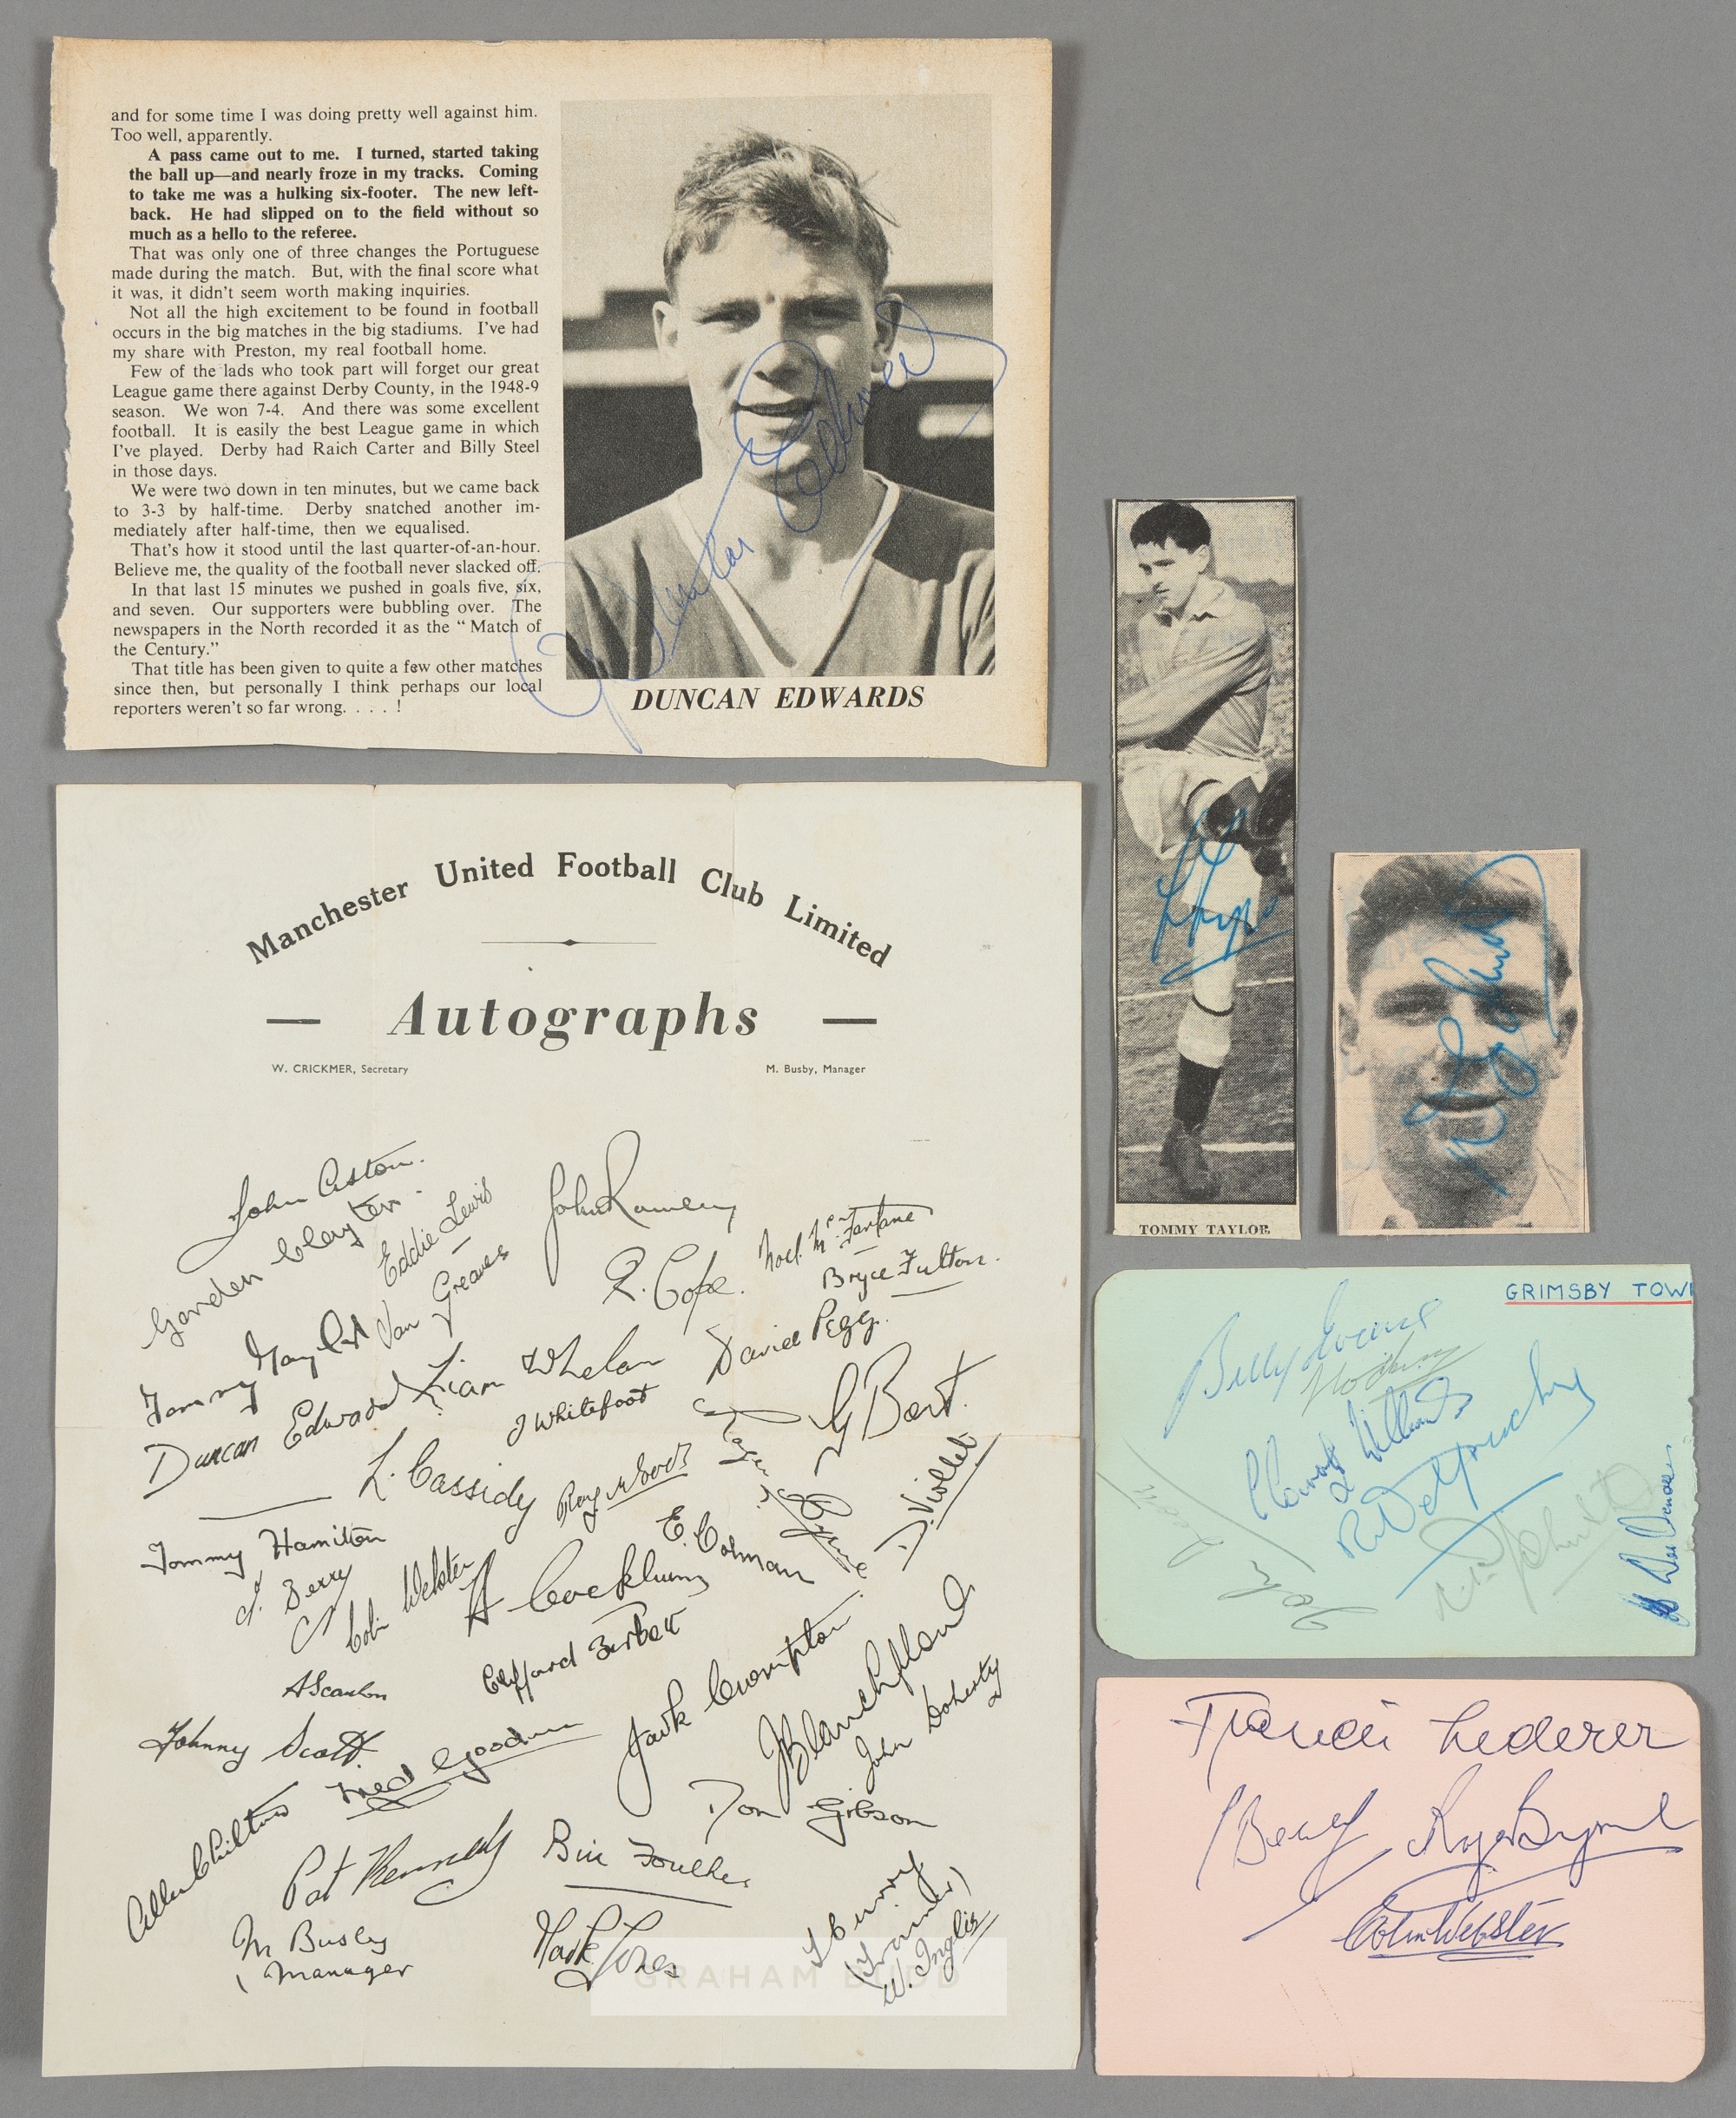 Manchester United 'Busby Babes' autographs, comprising Duncan Edwards, Tommy Taylor and Bobby